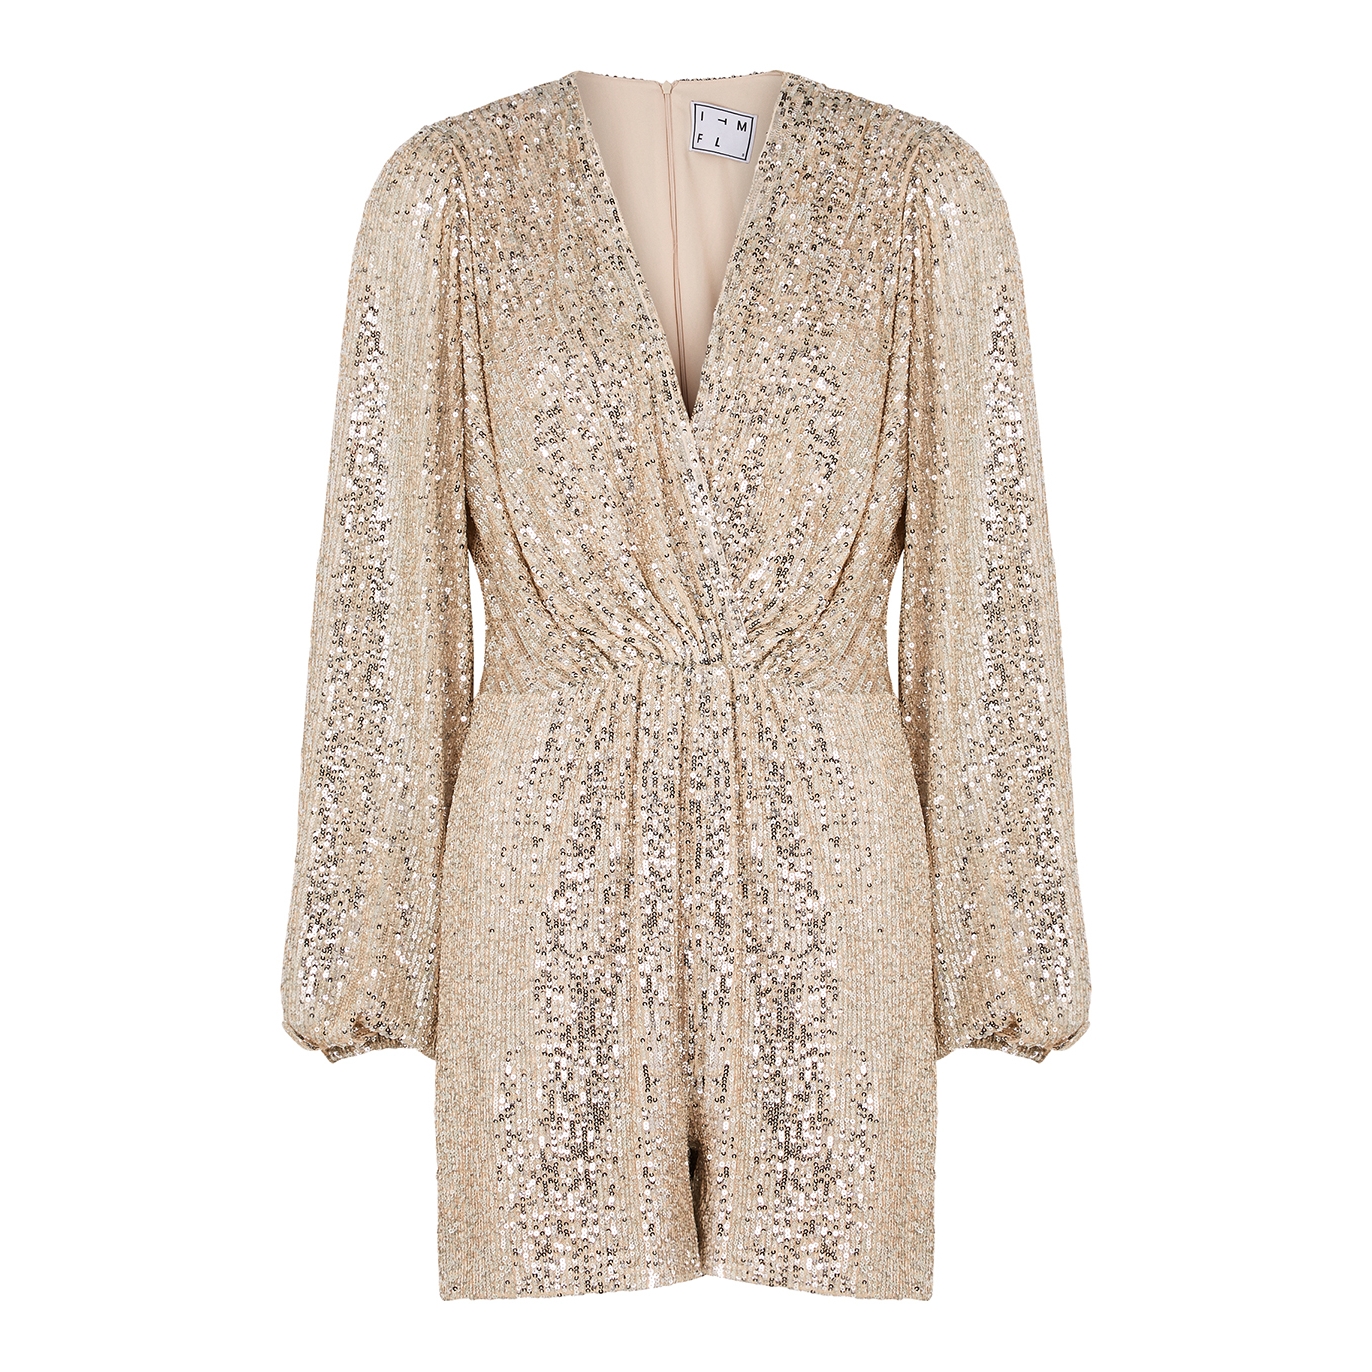 IN The Mood For Love Bjork Silver Sequin Playsuit